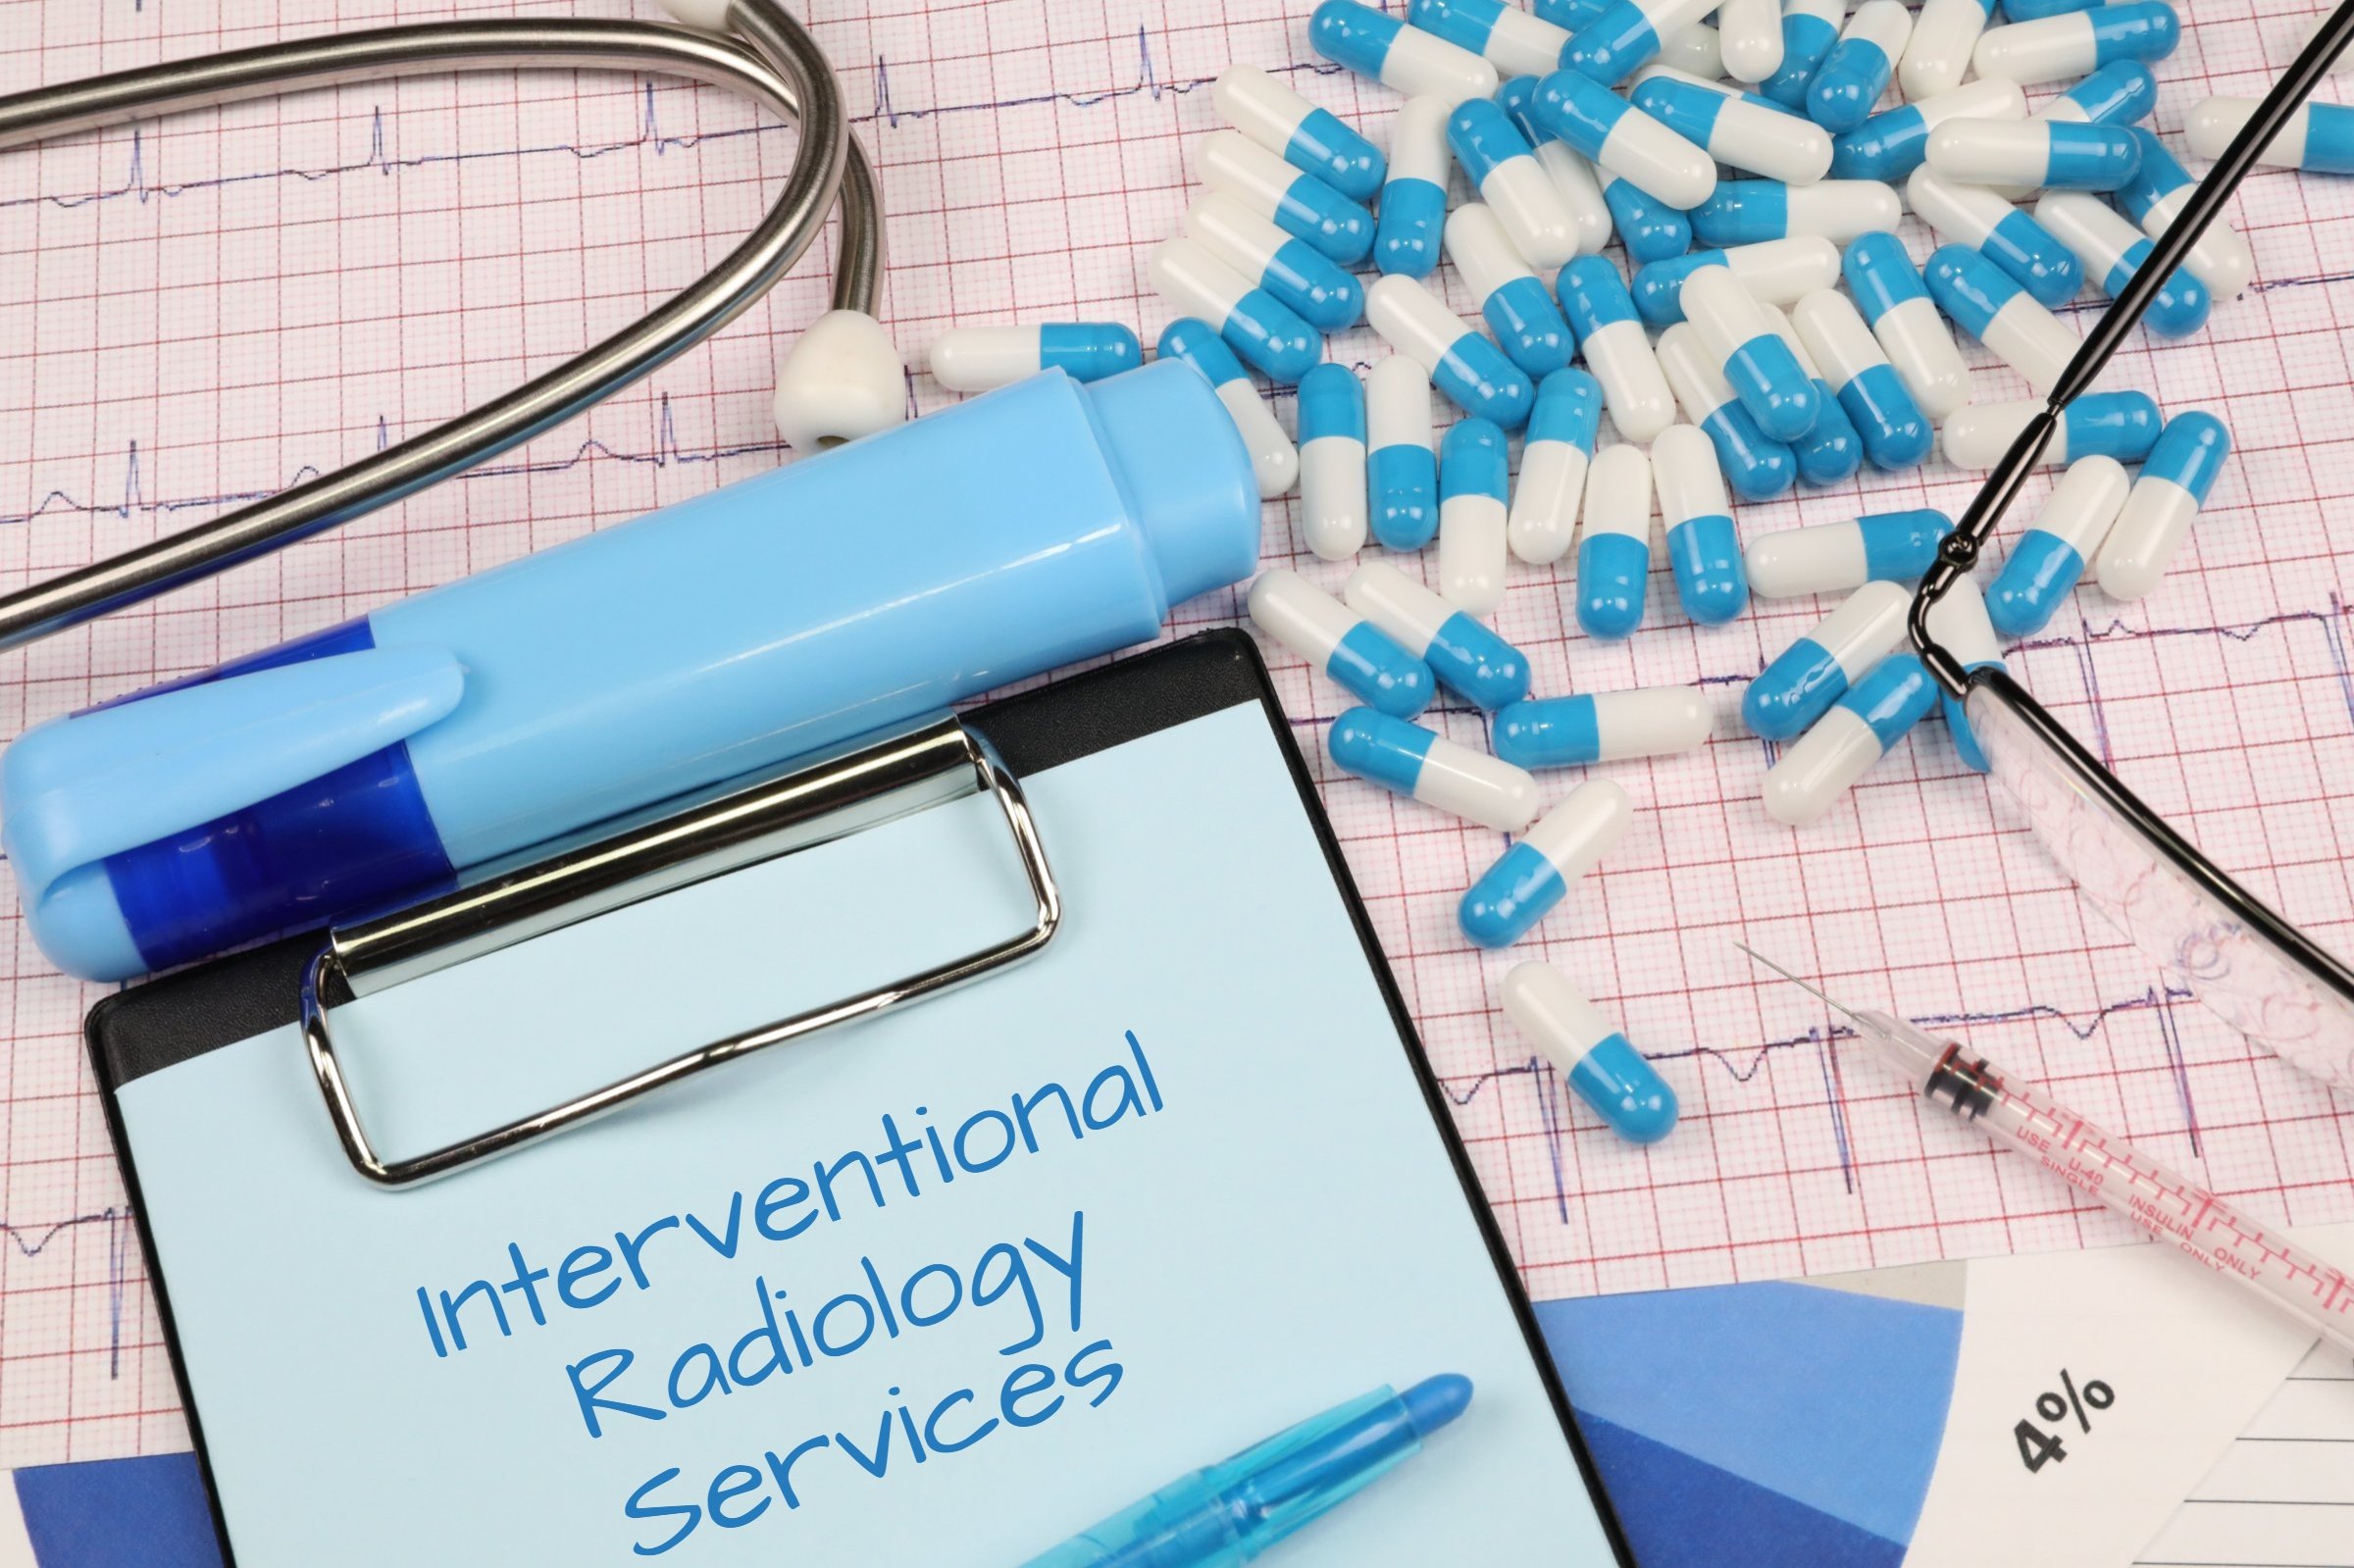 interventional radiology services